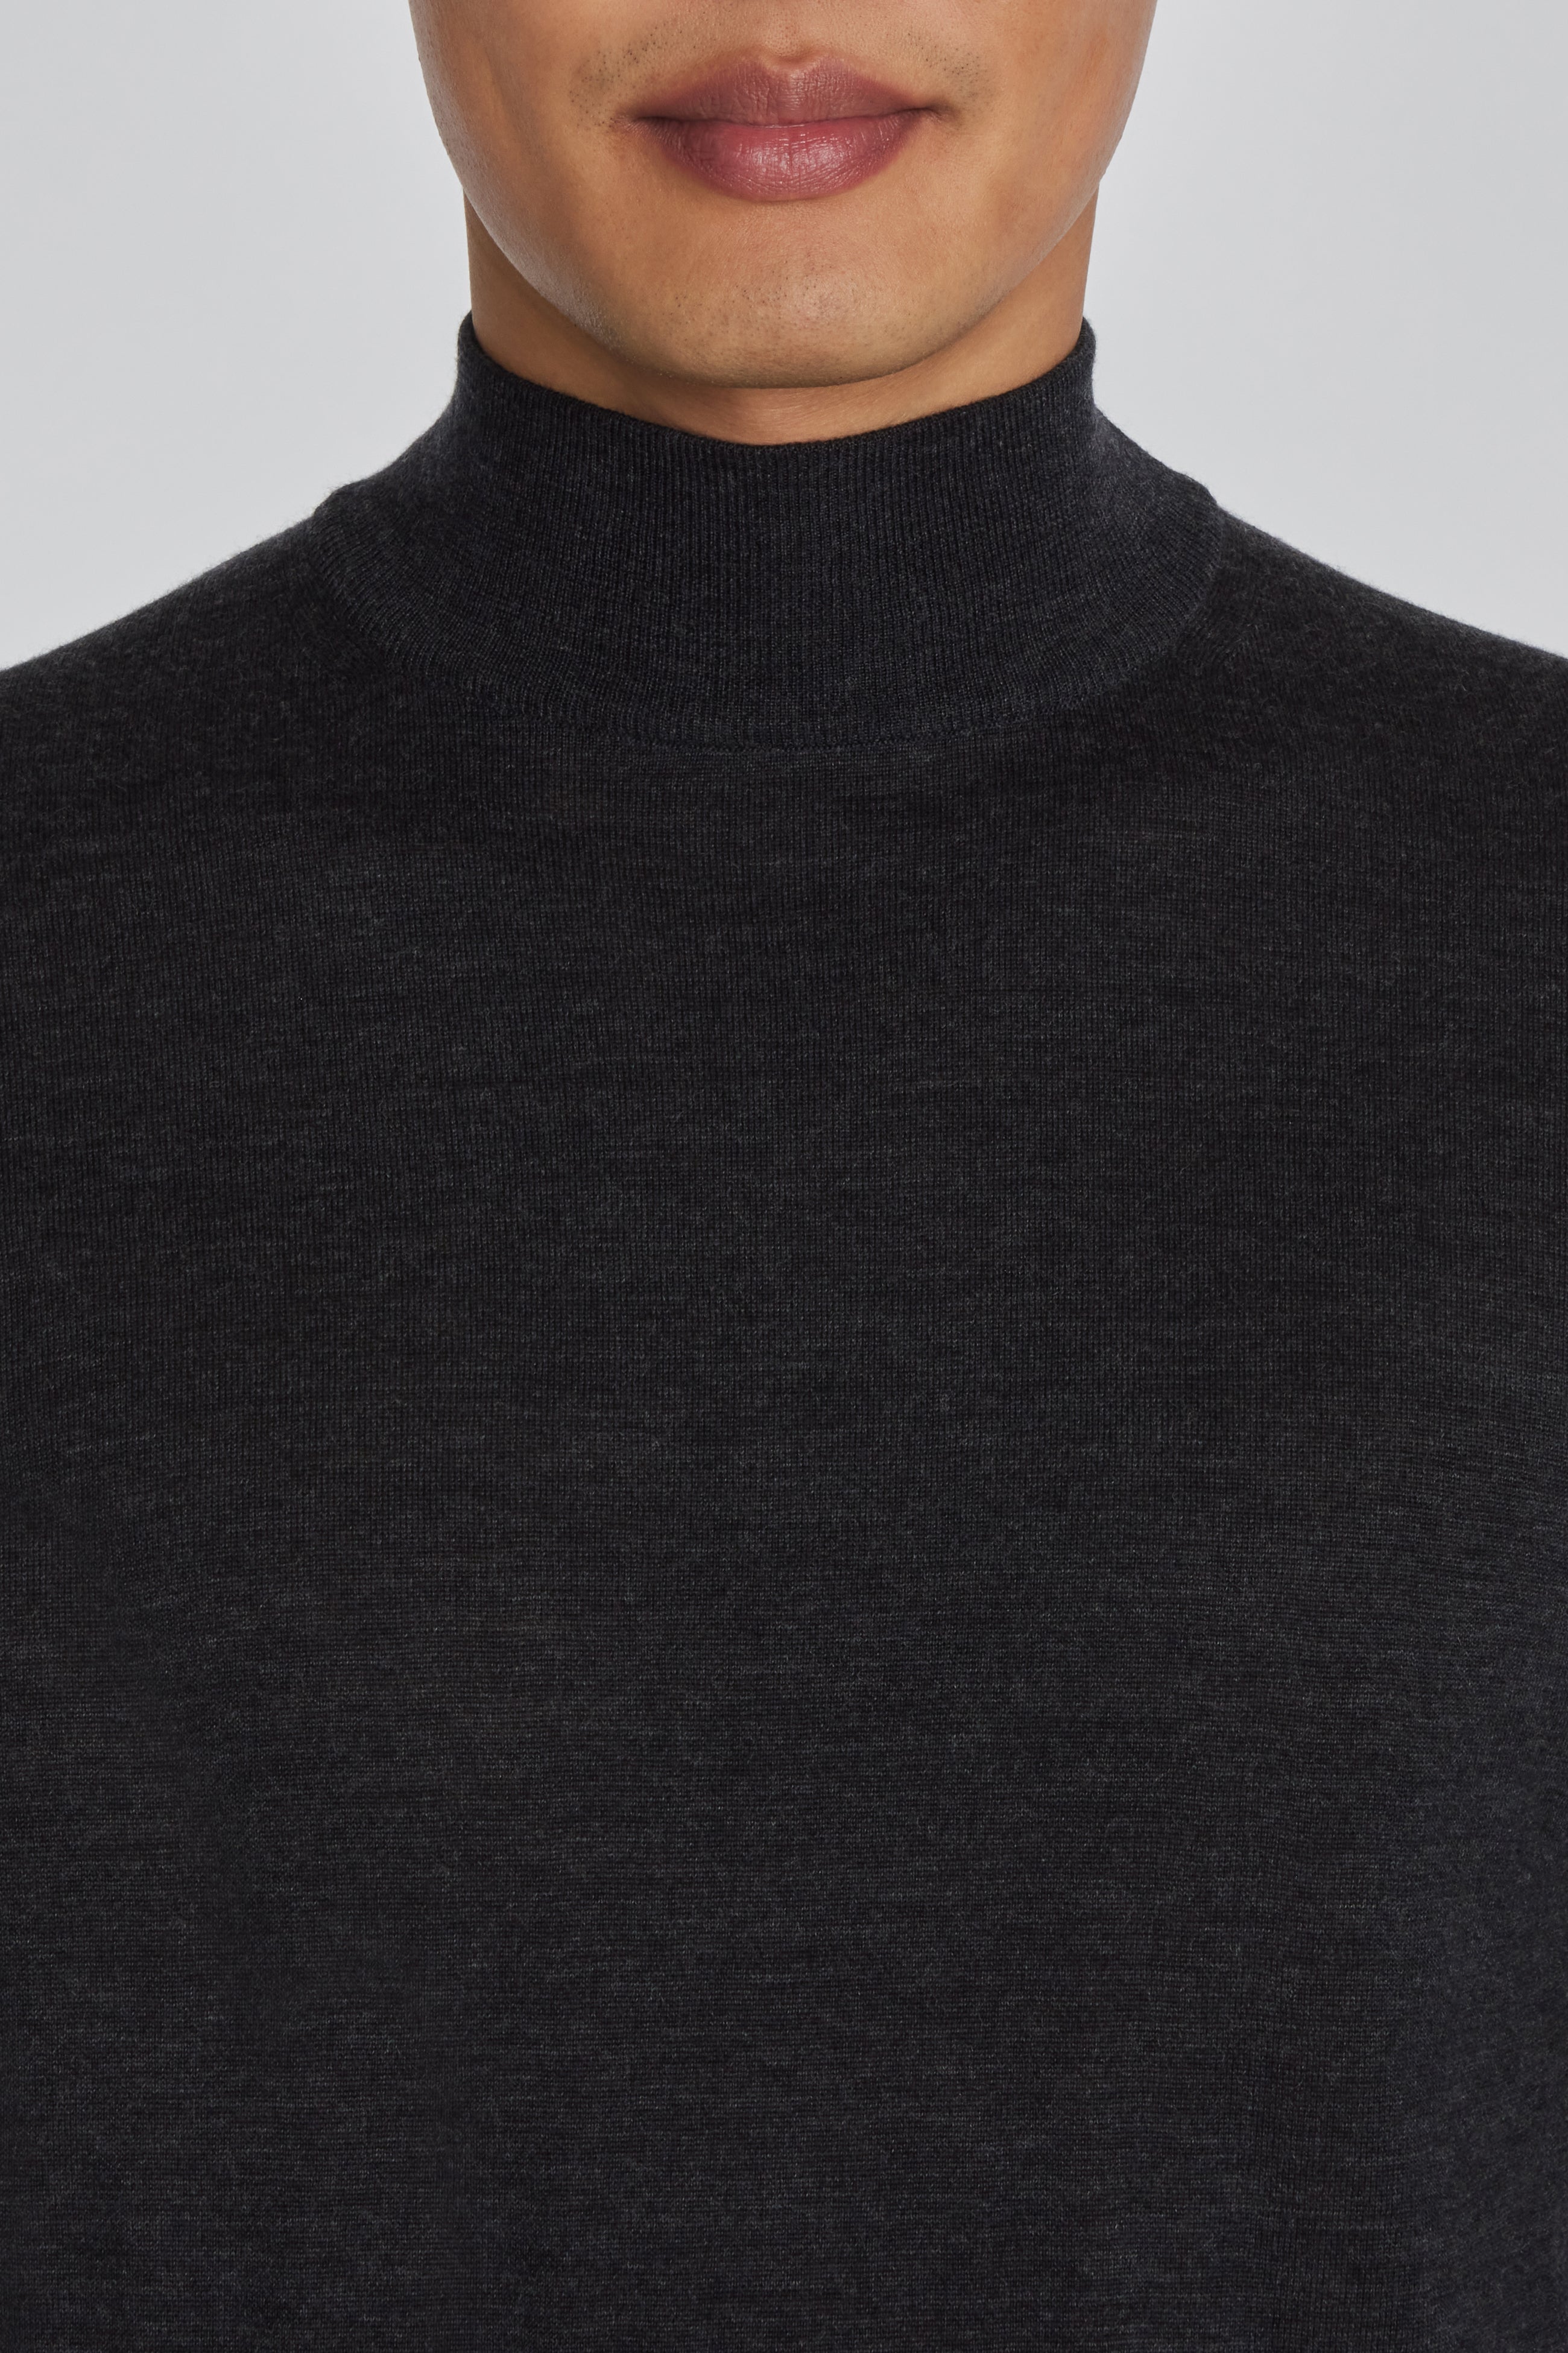 Alt view 2 Beaudry Wool, Silk and Cashmere Mock Neck Sweater in Charcoal